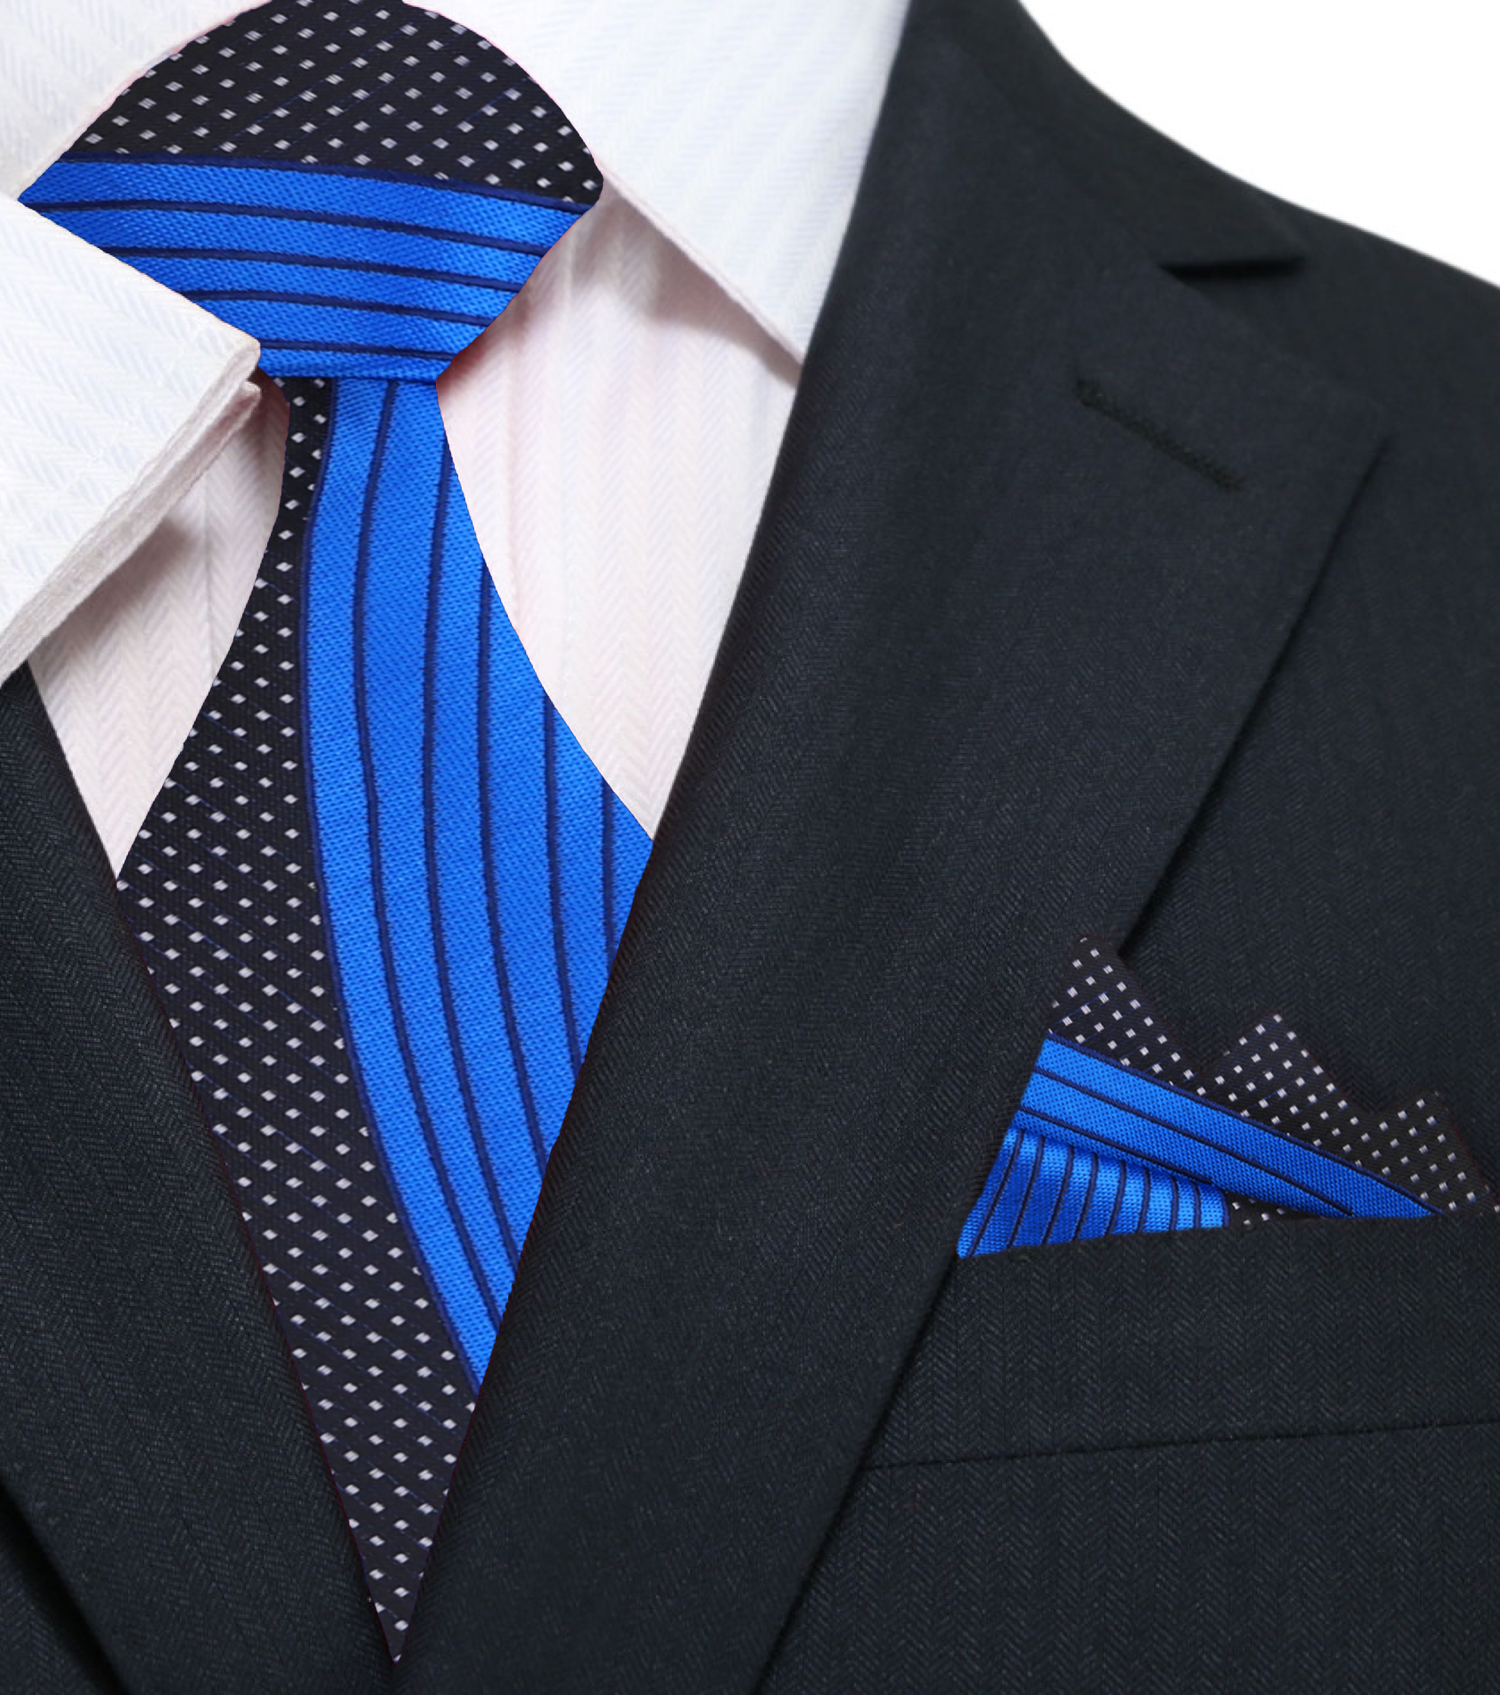 View 2: Blue, Black United Tie and Square